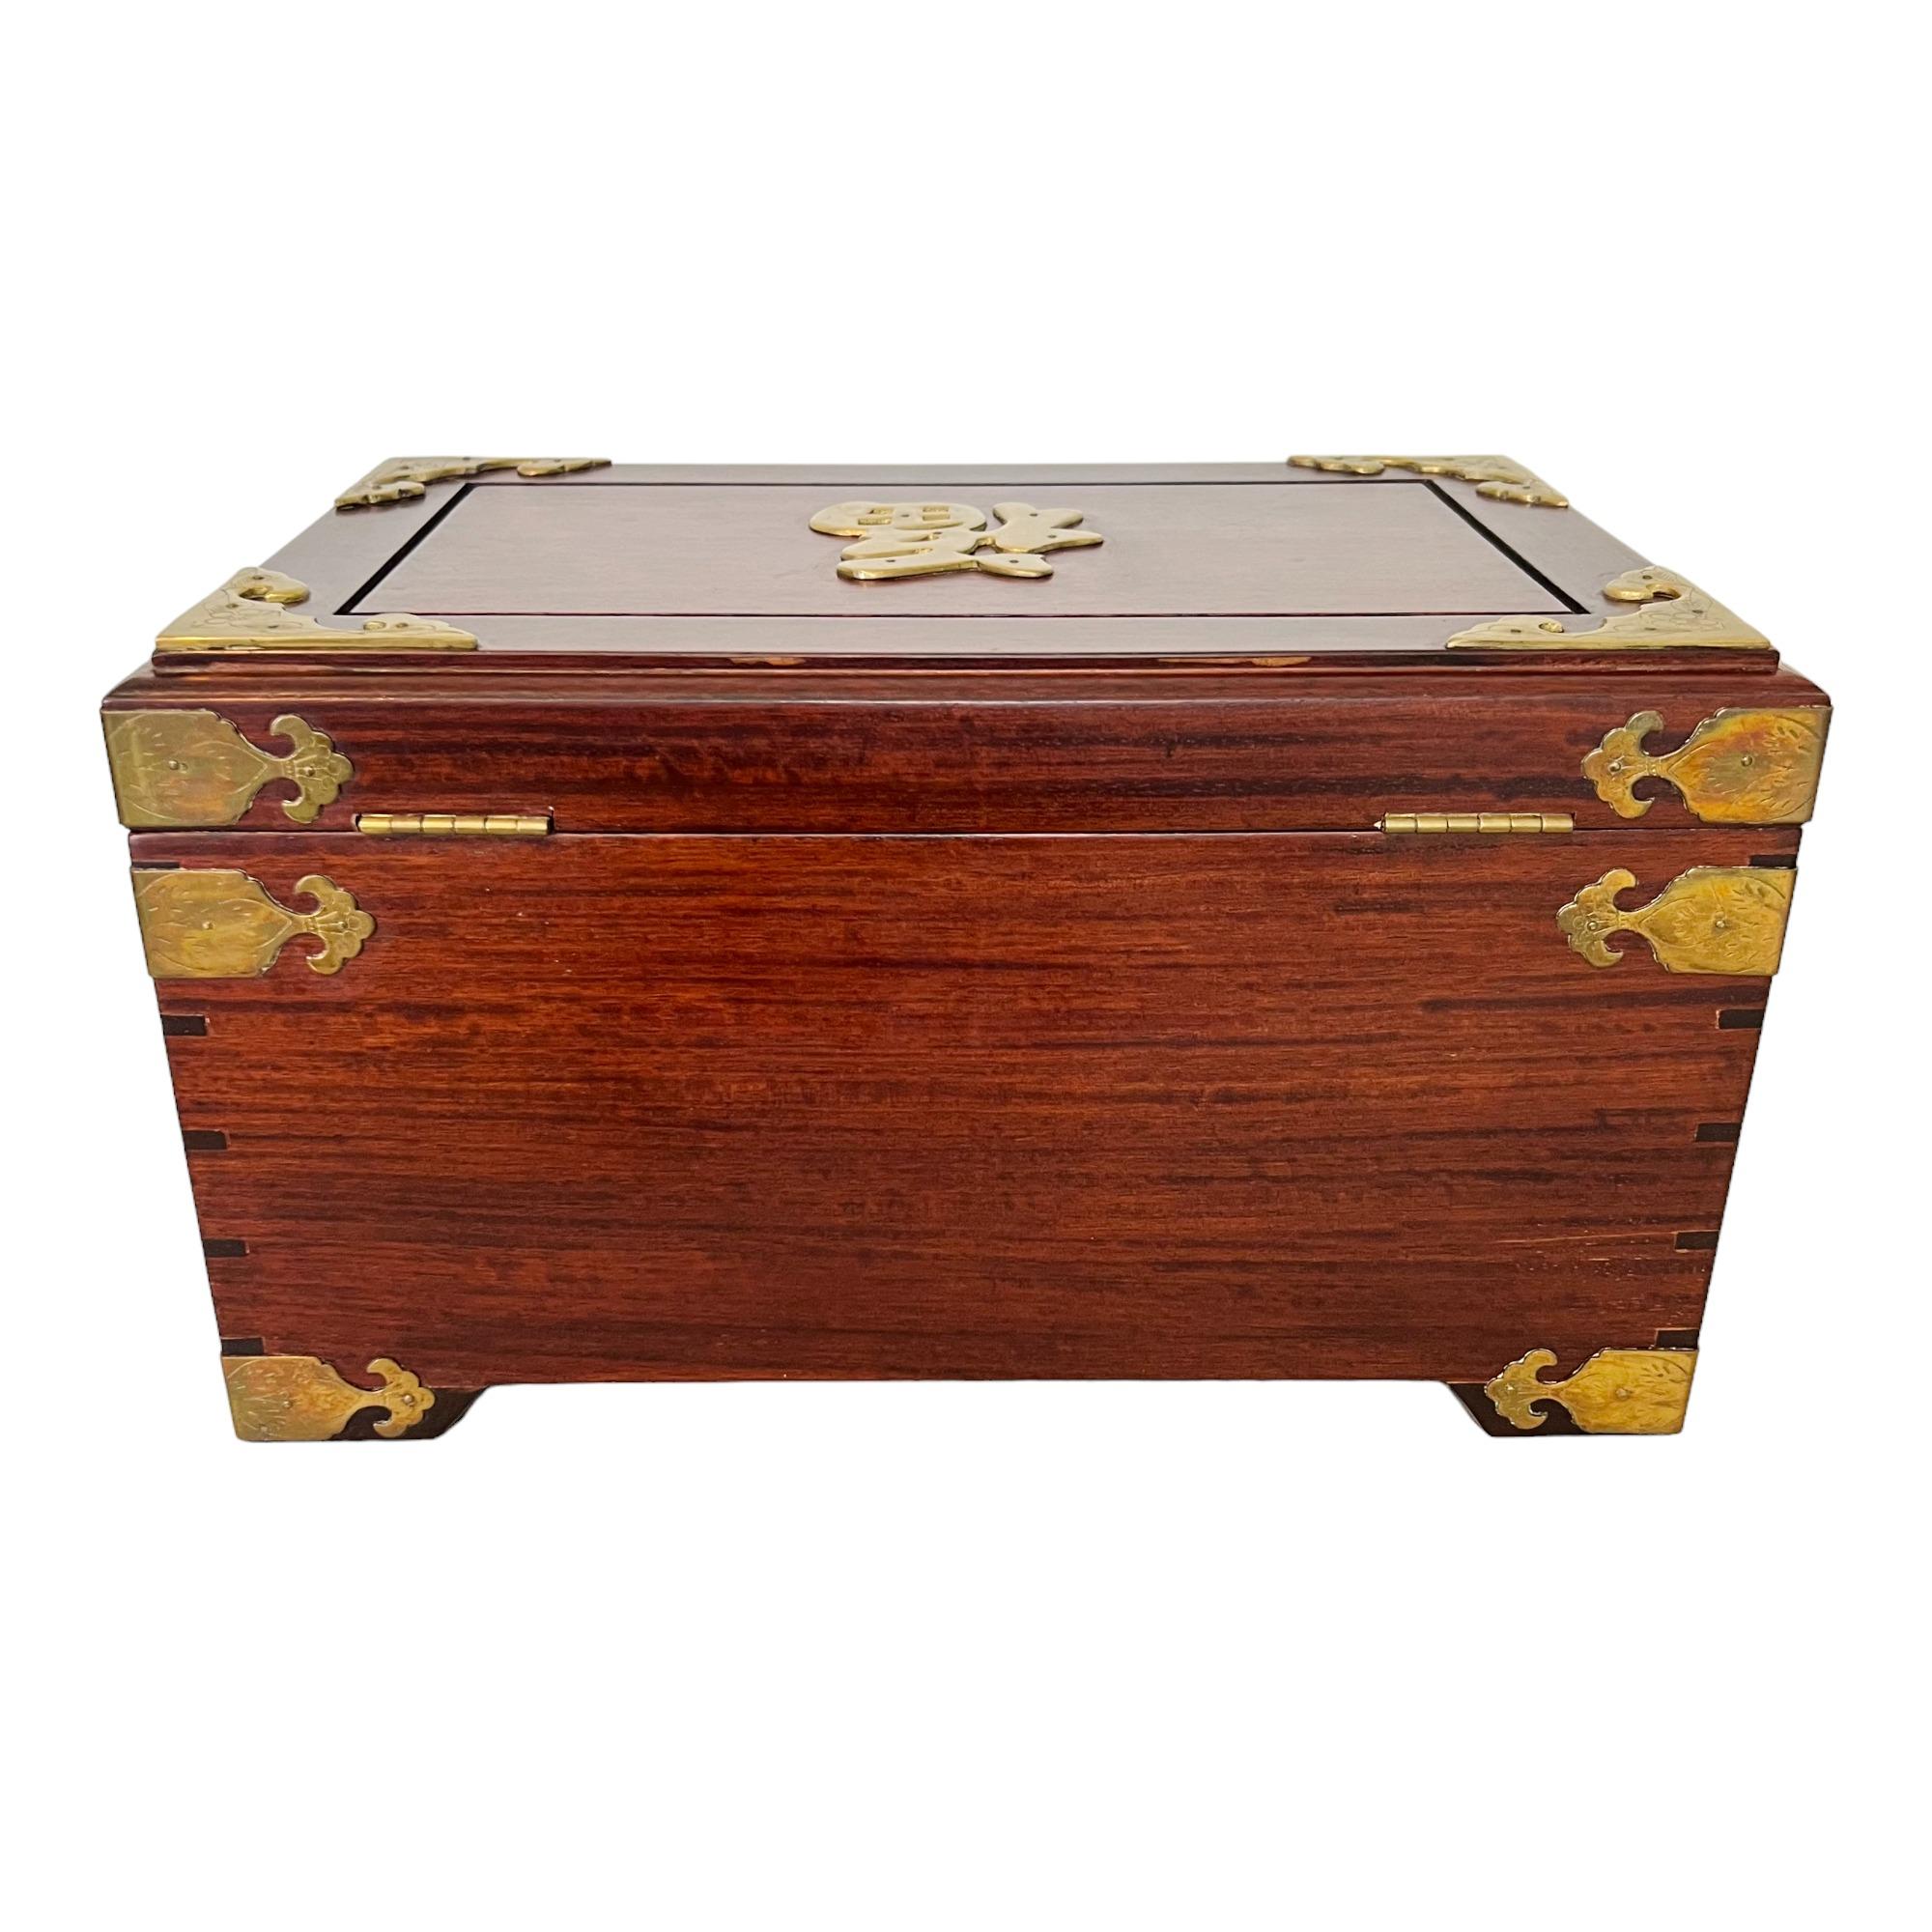 Vintage Chinese Brass Accented Wood Jewelry Box Chest In Good Condition For Sale In Harlingen, TX